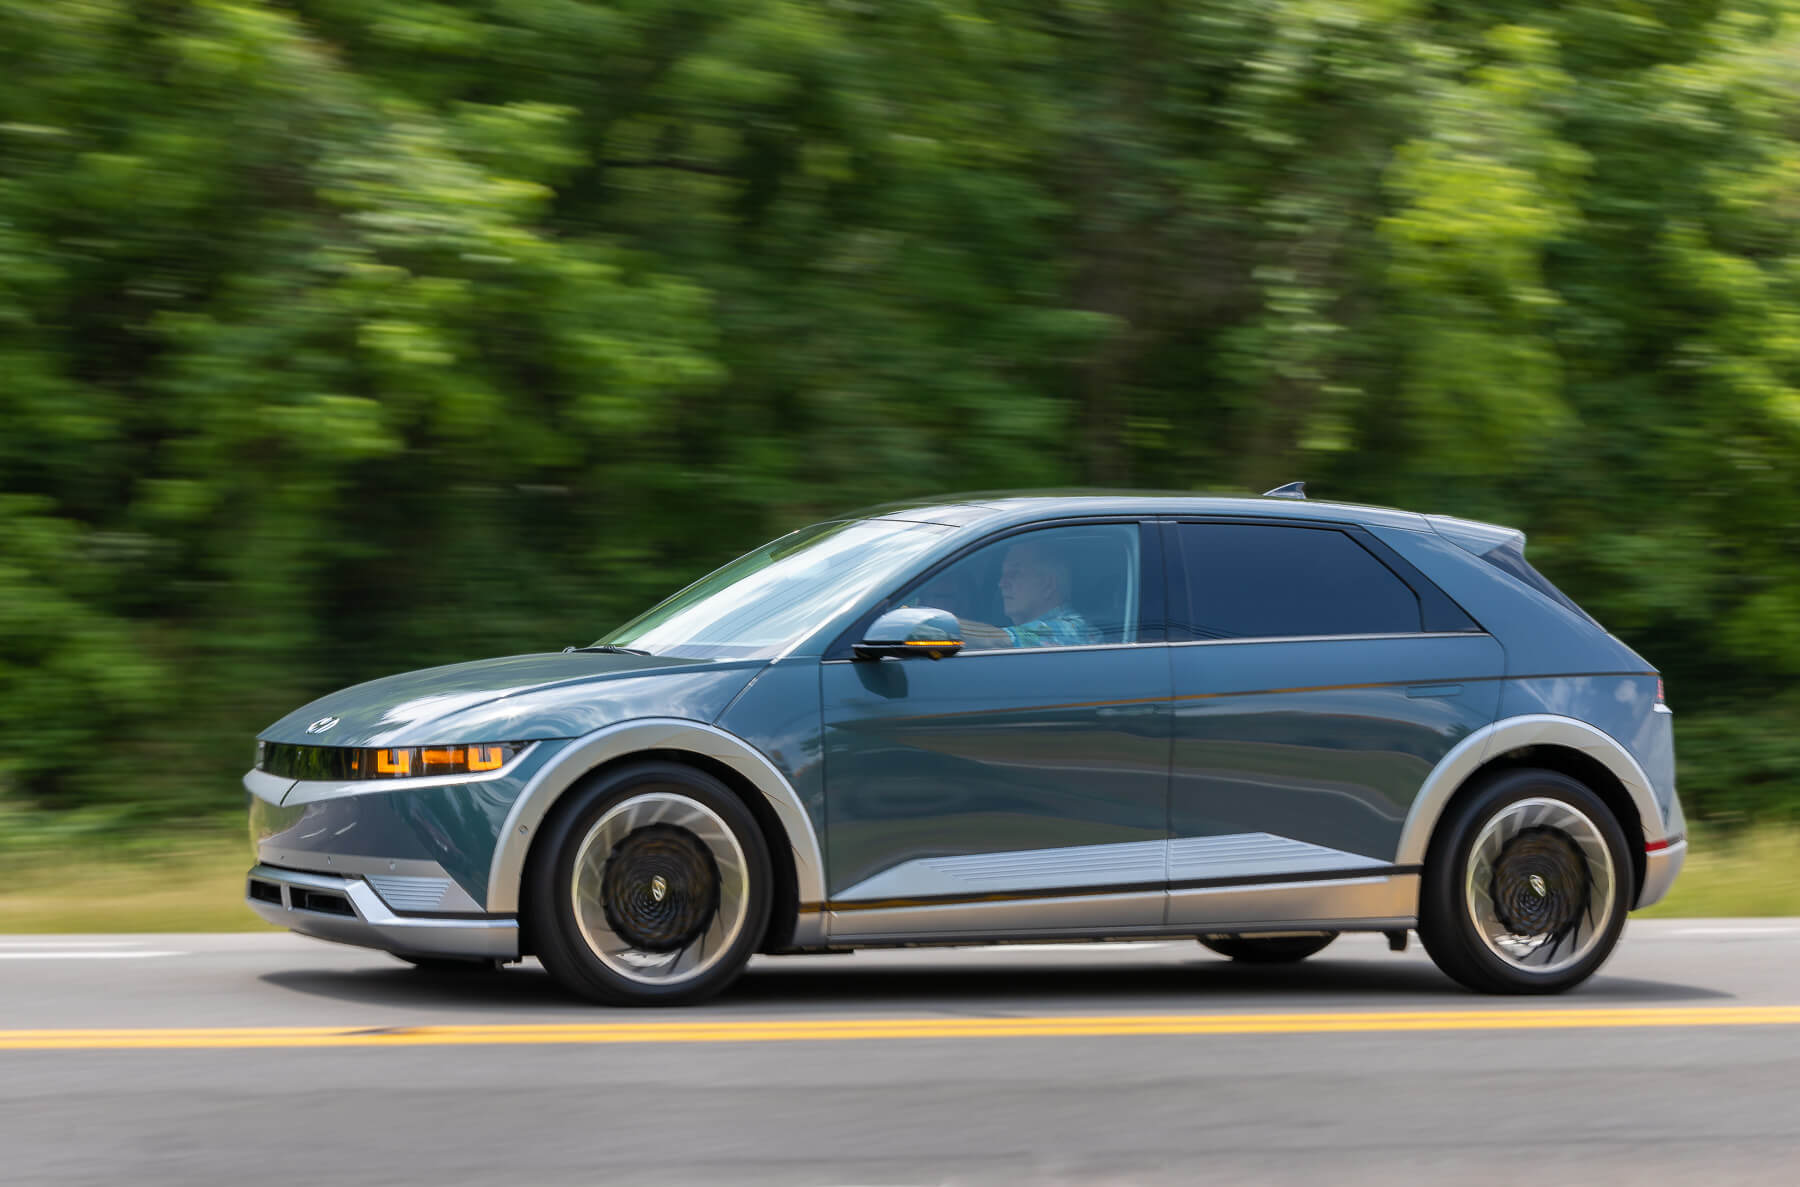 A 2023 Hyundai Ioniq 5 electric SUV rolls down a road with blurred greenery in the background. It's the lowest rated 2023 compact SUV according to J.D. Power